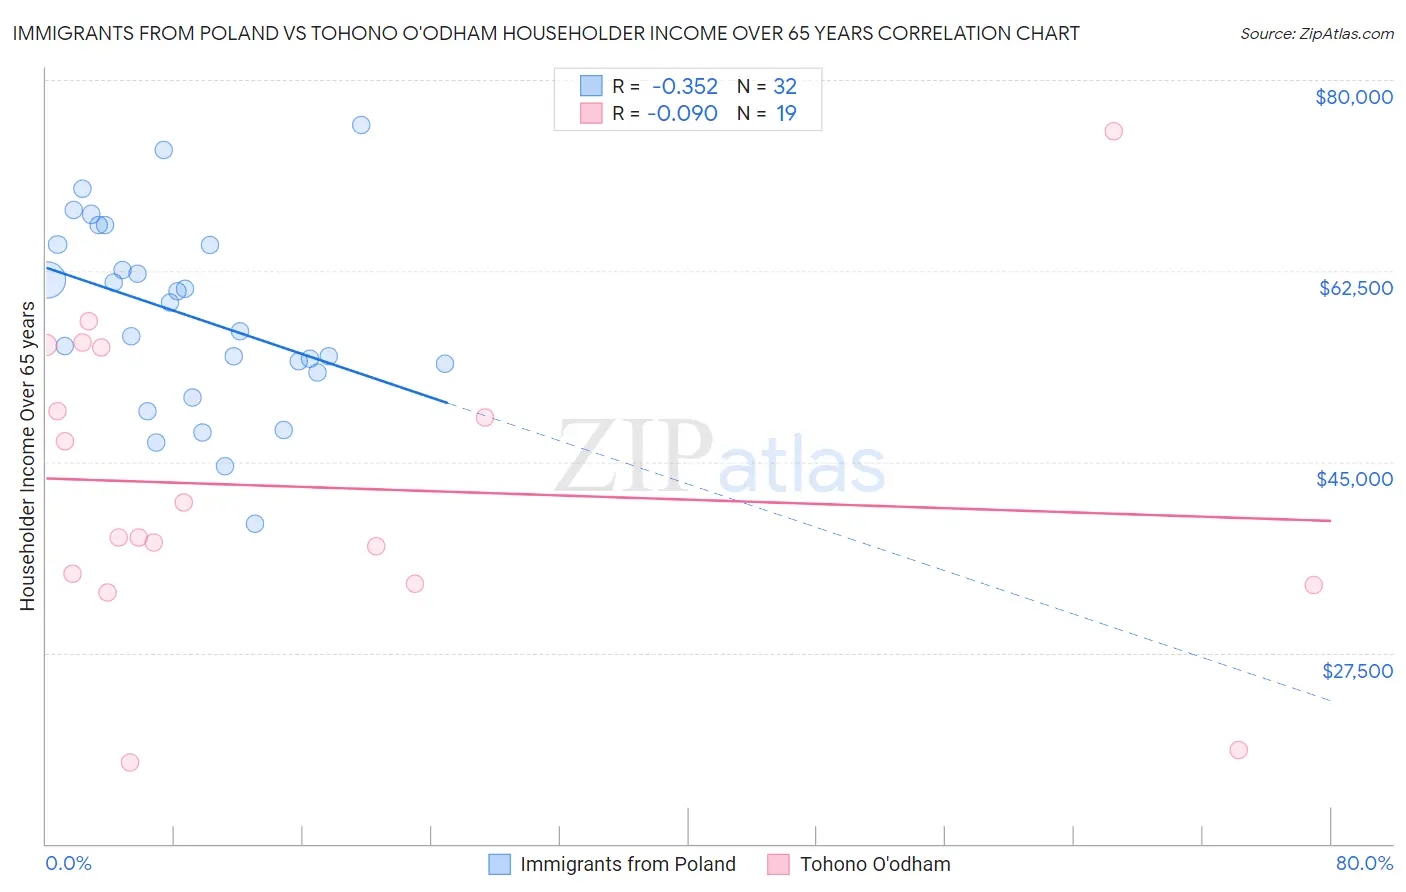 Immigrants from Poland vs Tohono O'odham Householder Income Over 65 years